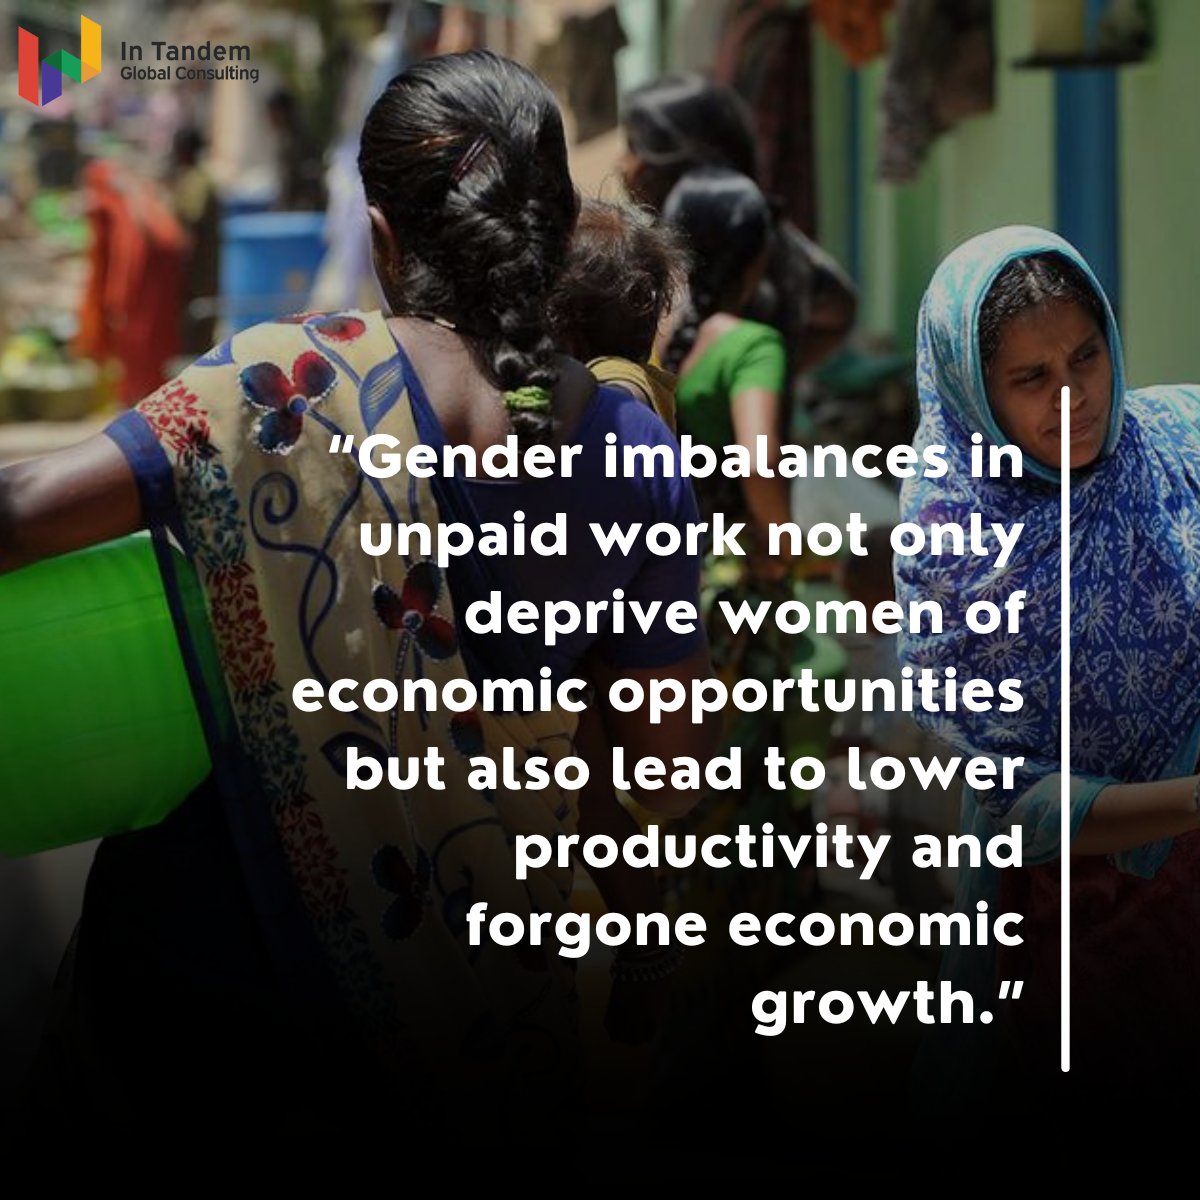 Women's unpaid work is often undervalued and overlooked, yet it plays a crucial role in our economy. By addressing these imbalances, we can create a more equitable society for all. Stay tuned as we delve deeper into this topic in our upcoming paper, 'The Turning Tide.'